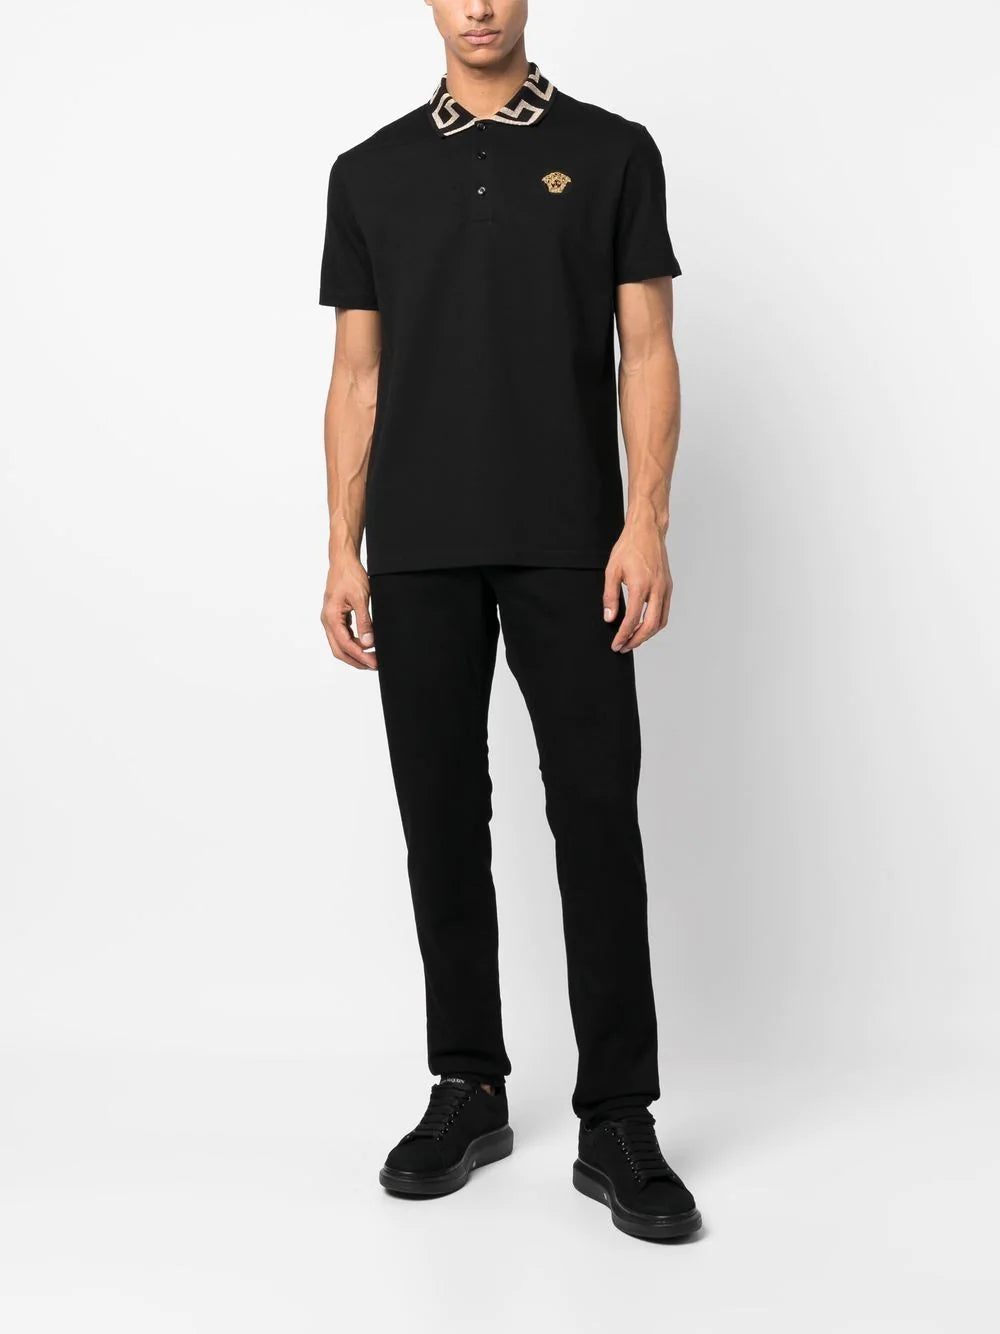 Versace Black Polo with Medusa and Gold Lurex Greek Key Collar